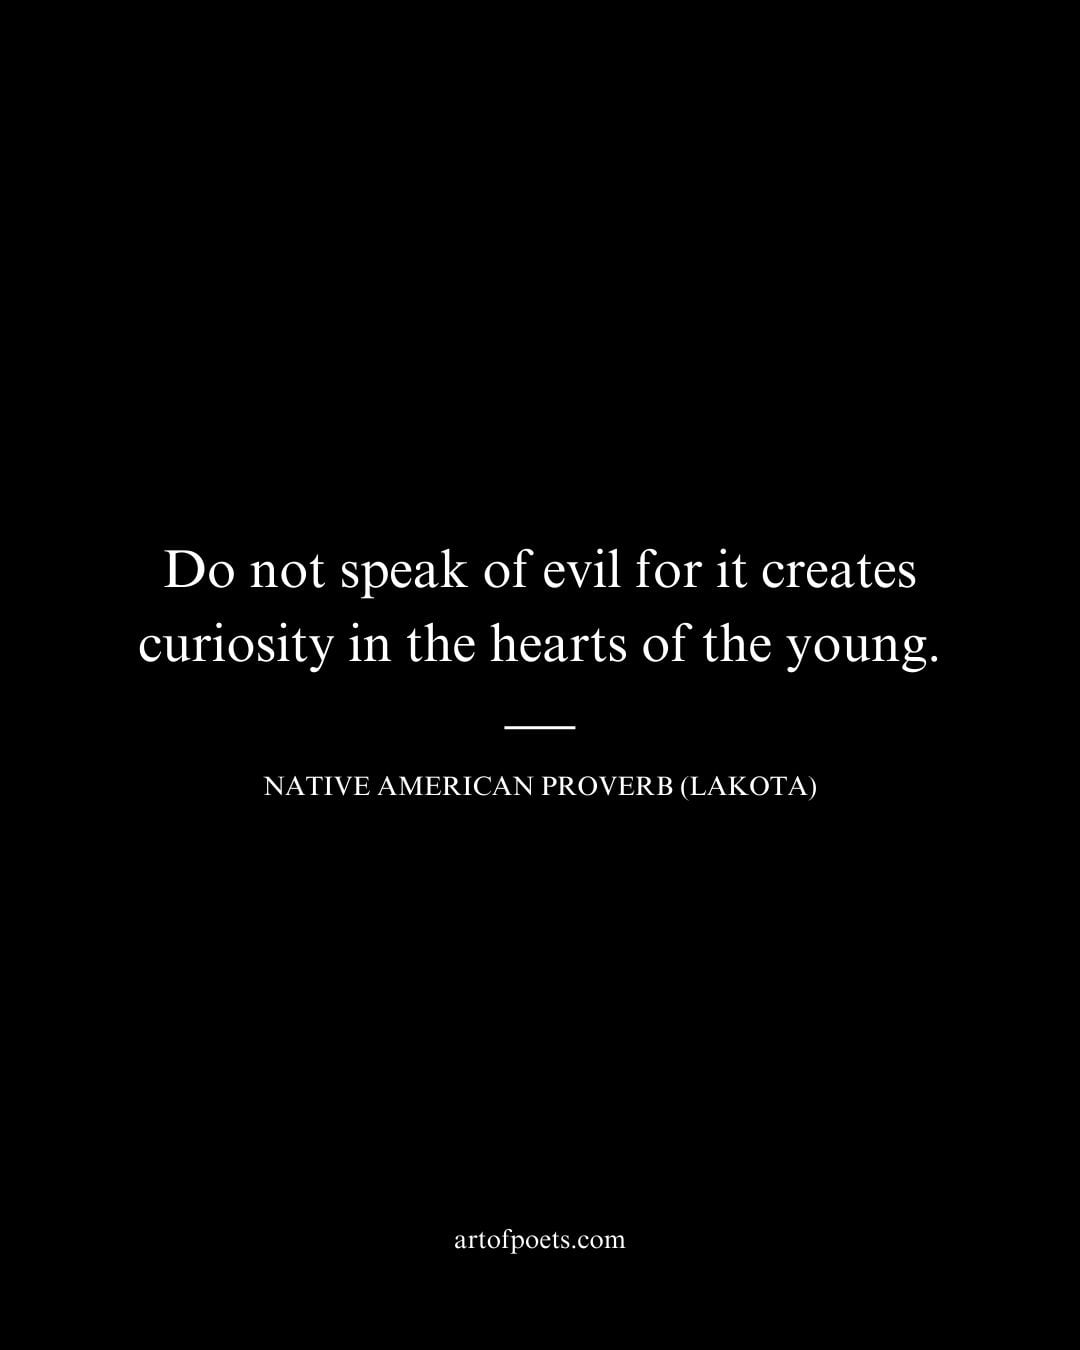 Do not speak of evil for it creates curiosity in the hearts of the young